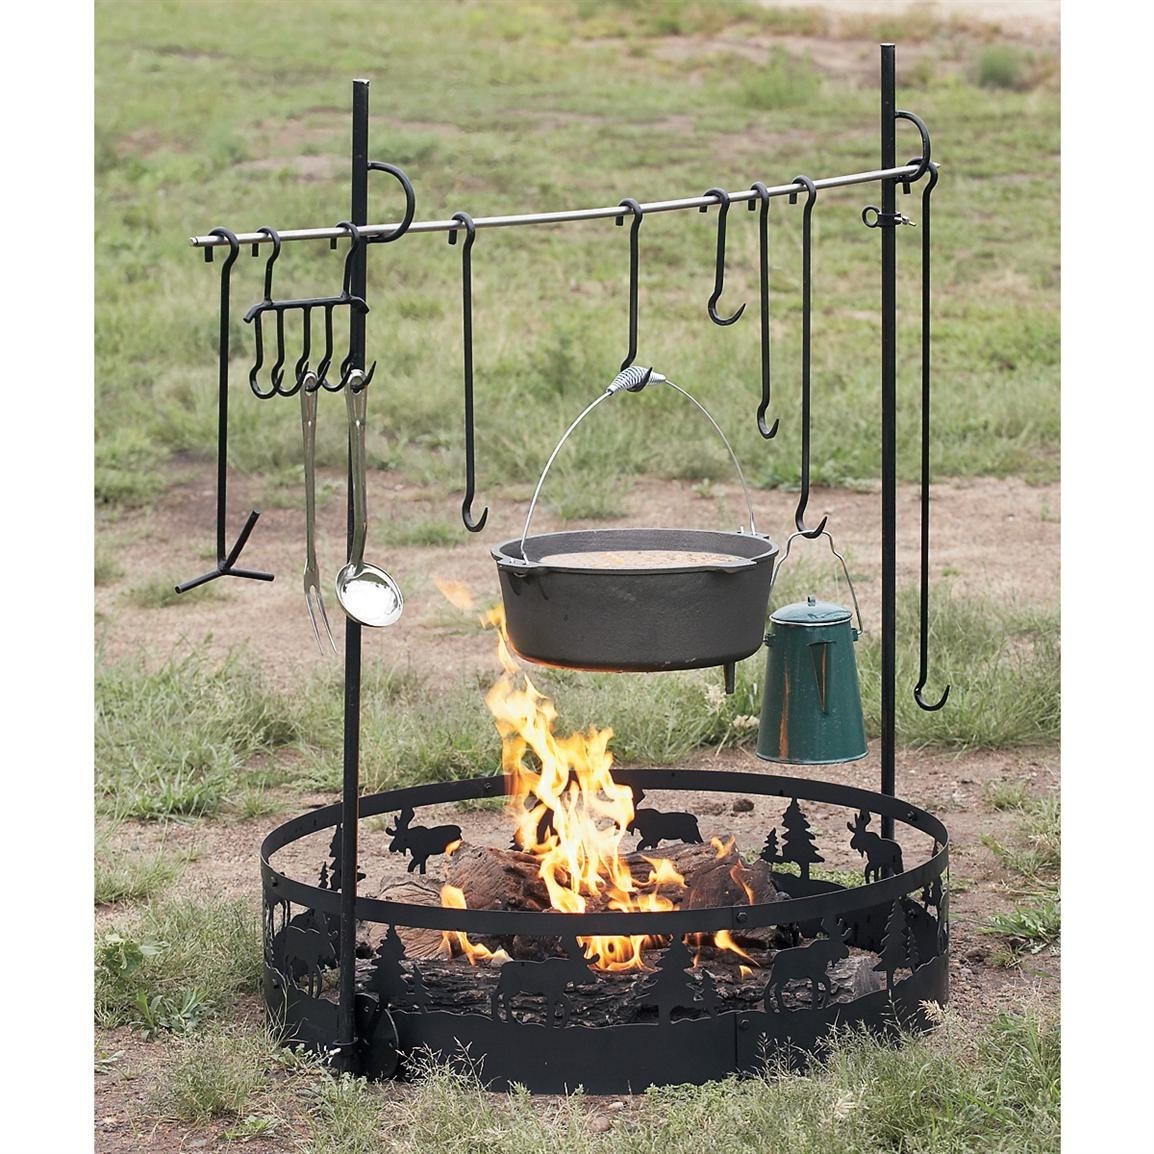 Cast iron outdoor grill 8